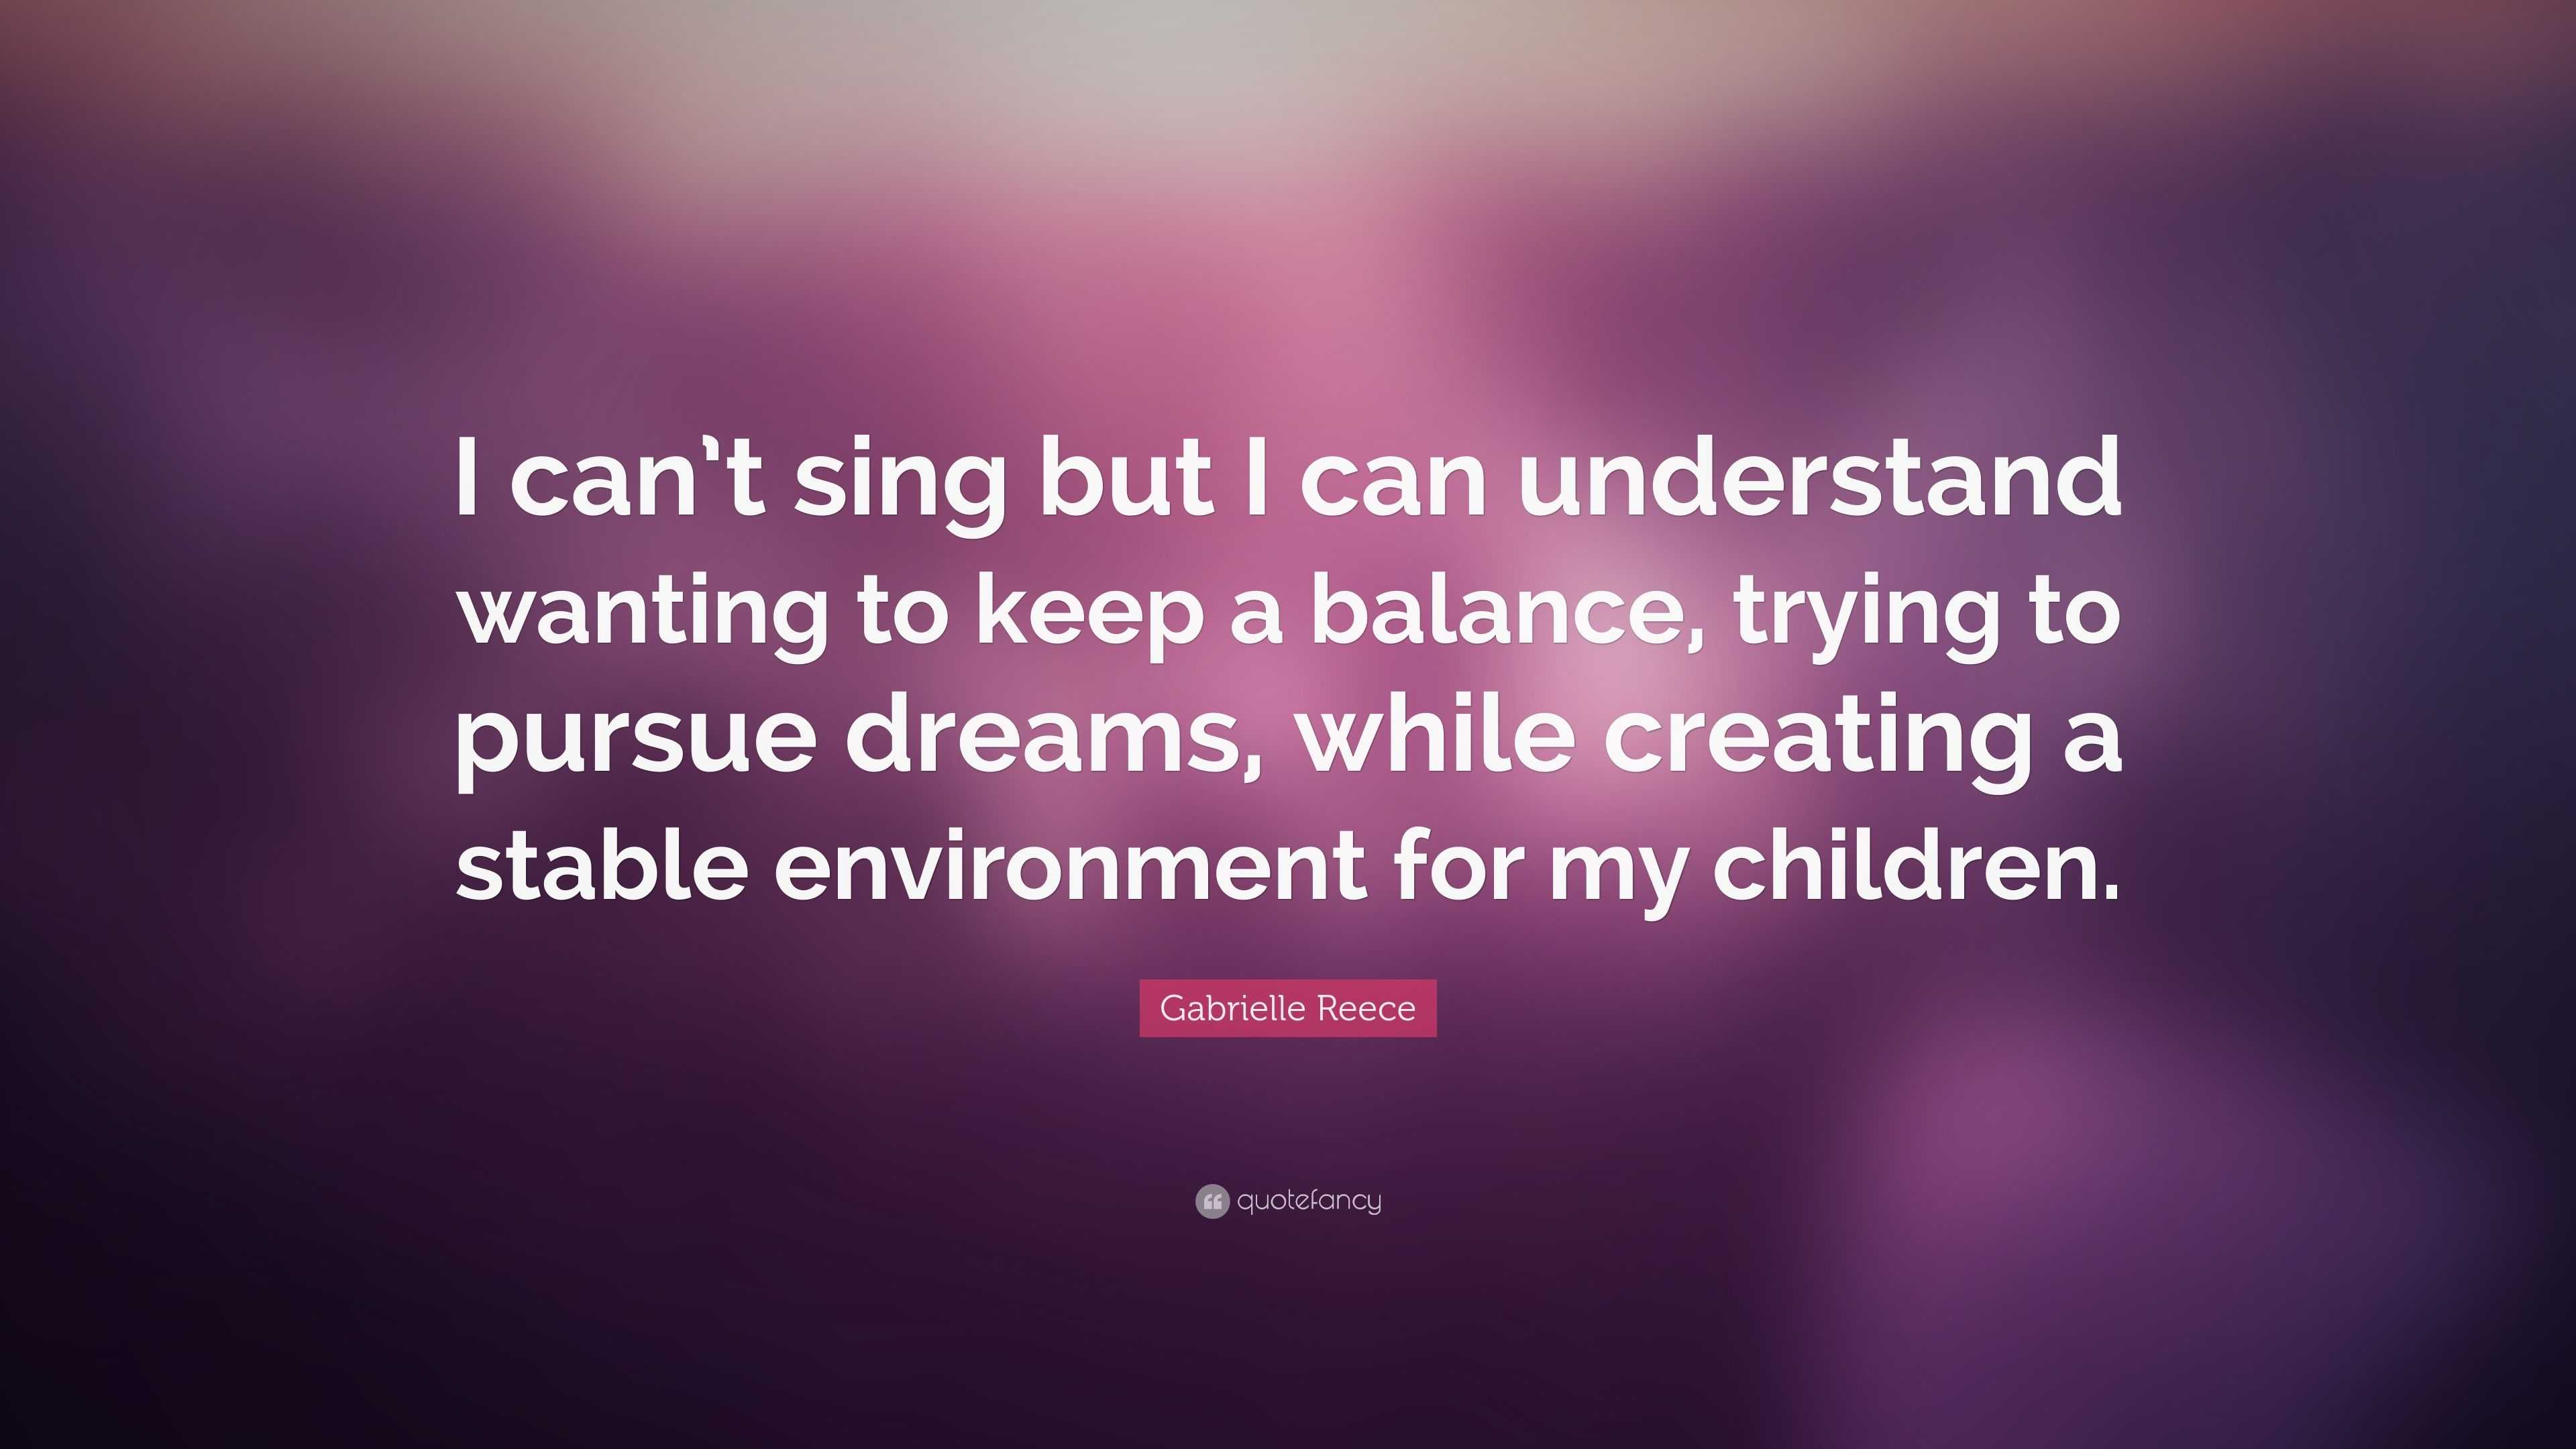 Gabrielle Reece Quote: “I can’t sing but I can understand wanting to ...